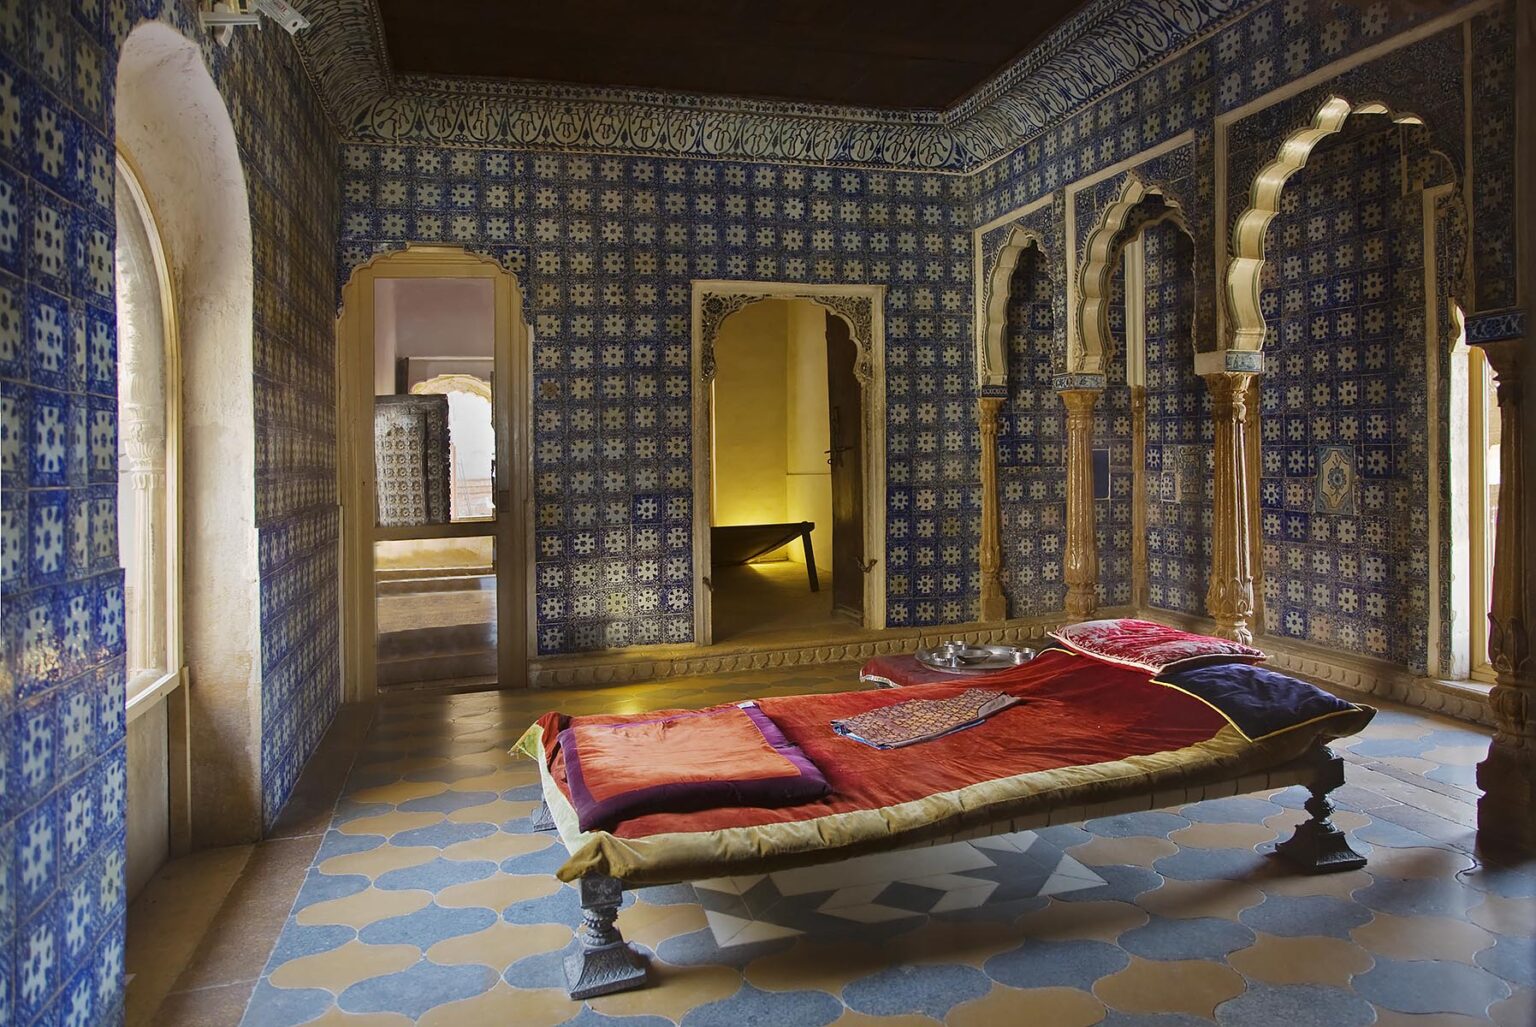 Dutch tiles decorate the walls of the sleeping quarters inside the MAHARAJA'S PALACE located inside JAISALMER FORT - RAJASTHAN, INDIA